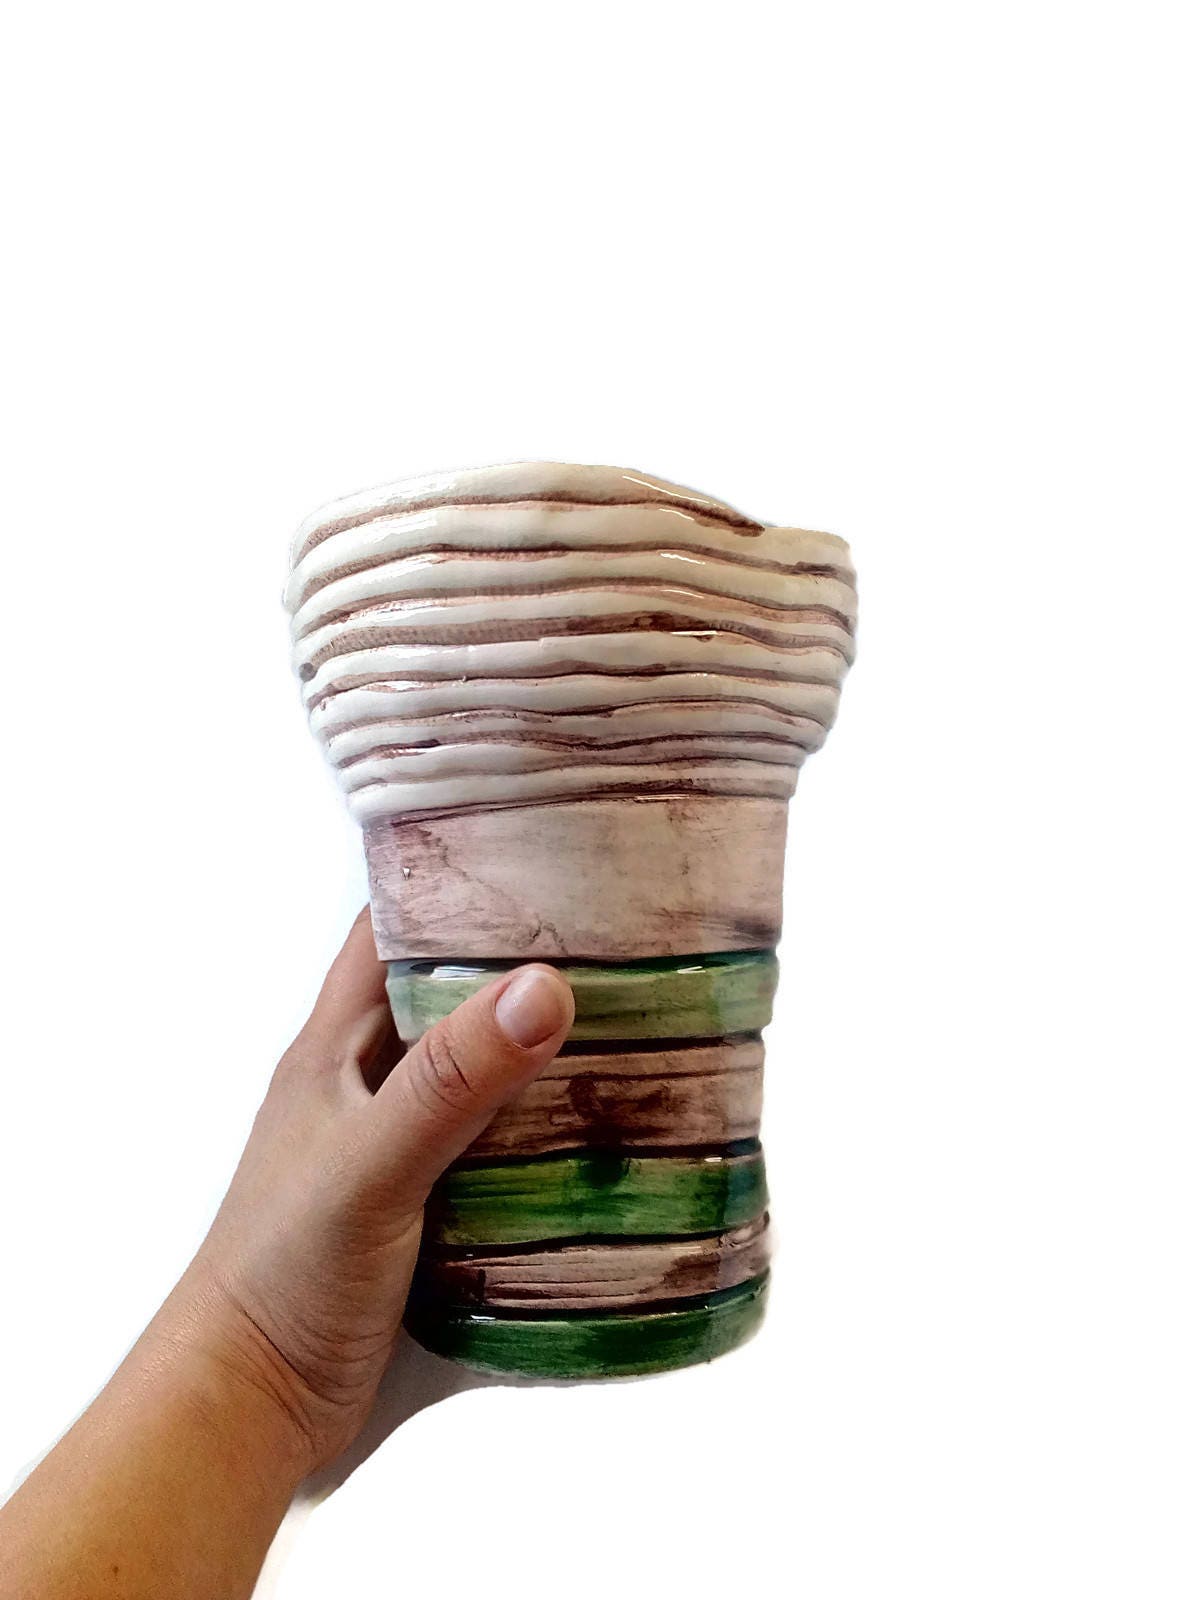 Handmade Ceramic Sculptural Vase For Home Decor, Textured Organic Shape Green And Brown Pottery Vase, Hand Painted Home Gifts For Her - Ceramica Ana Rafael